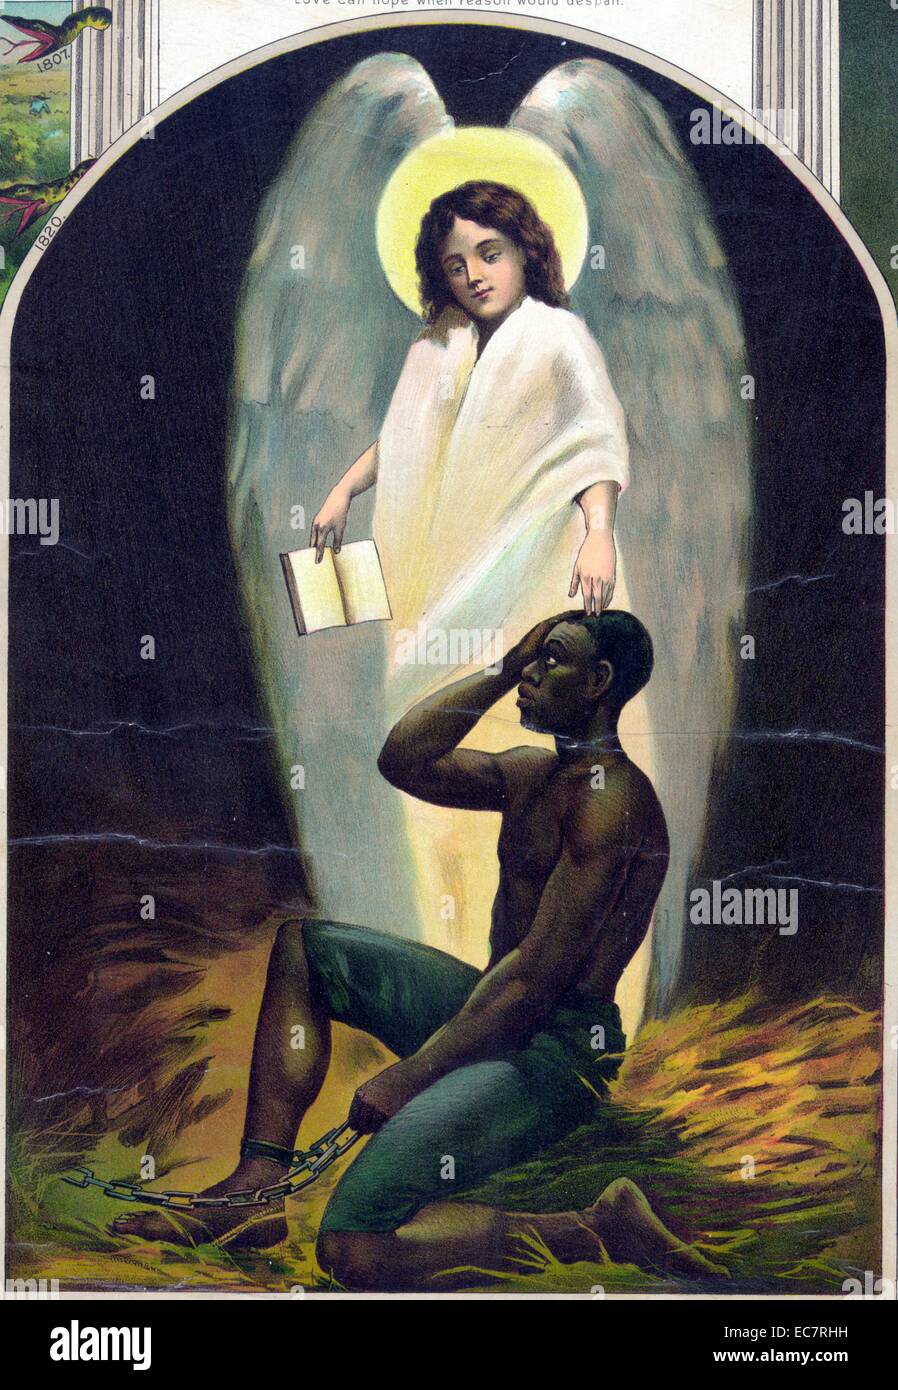 Afro-American Monument Published 1897. slave and angel. from a series pertaining to Afro-American history. Stock Photo